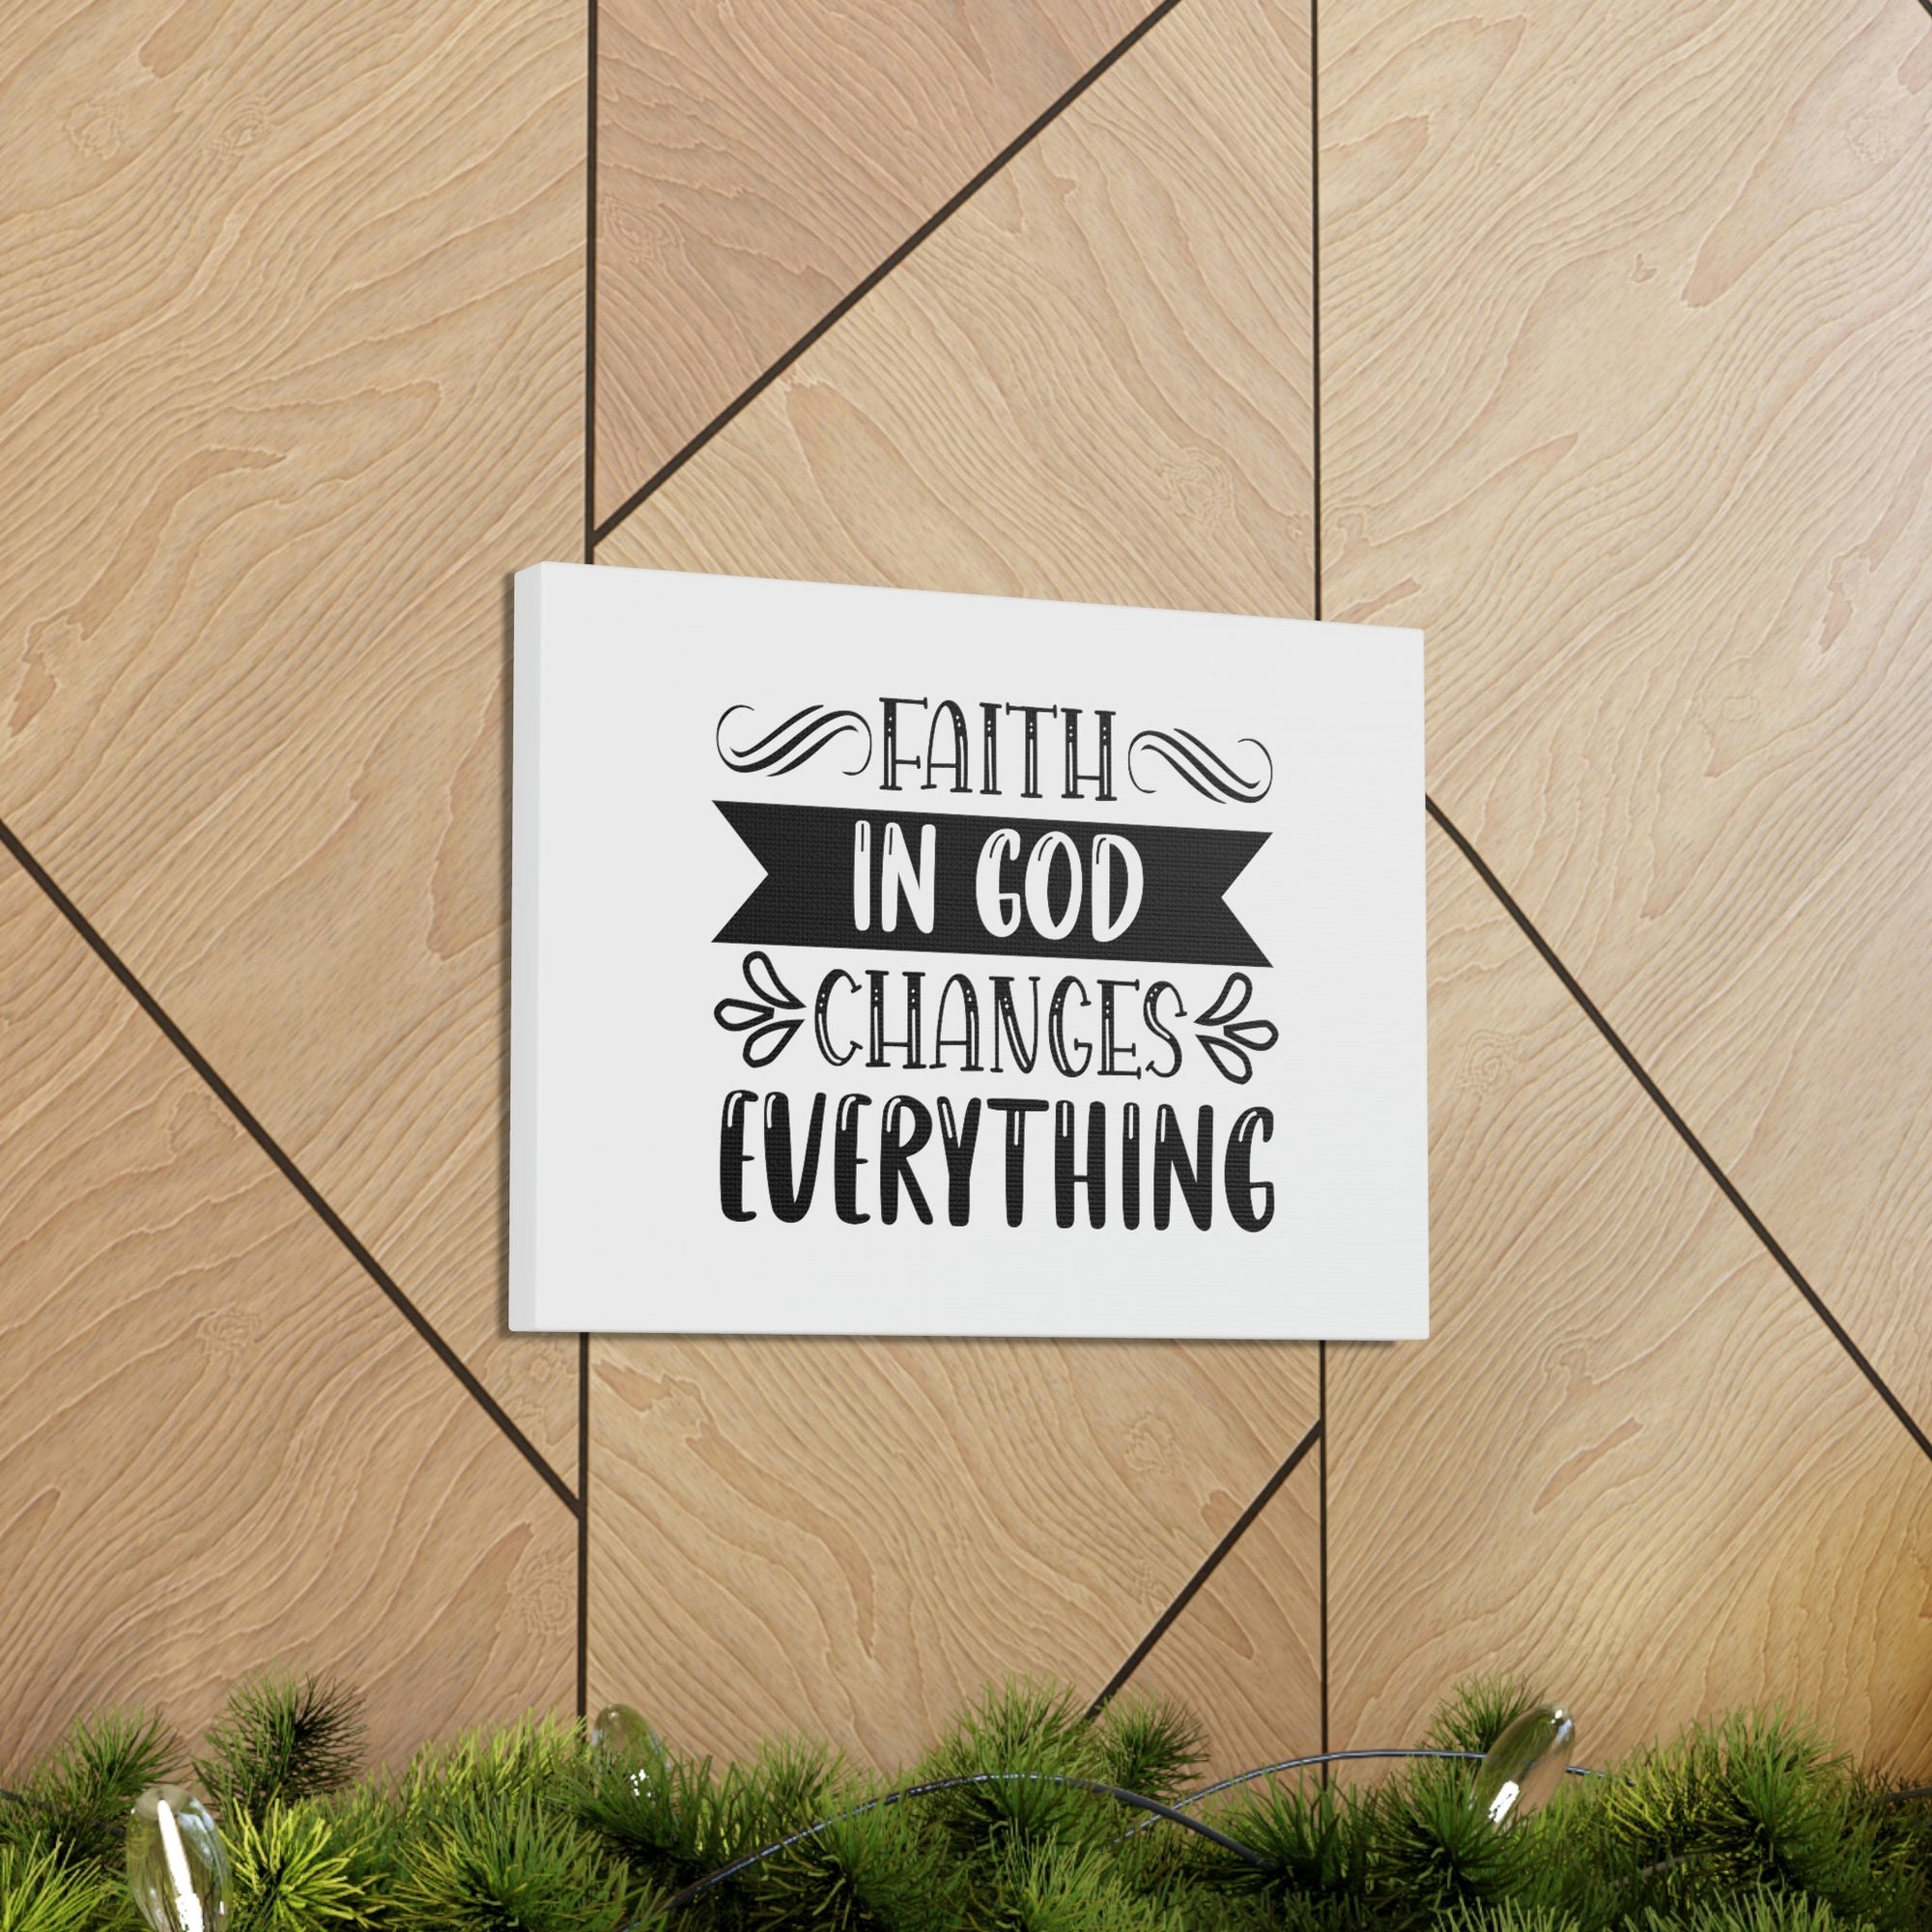 Scripture Walls Faith In God Changes Everything 2 Corinthians 5:17 Christian Wall Art Bible Verse Print Ready to Hang Unframed-Express Your Love Gifts